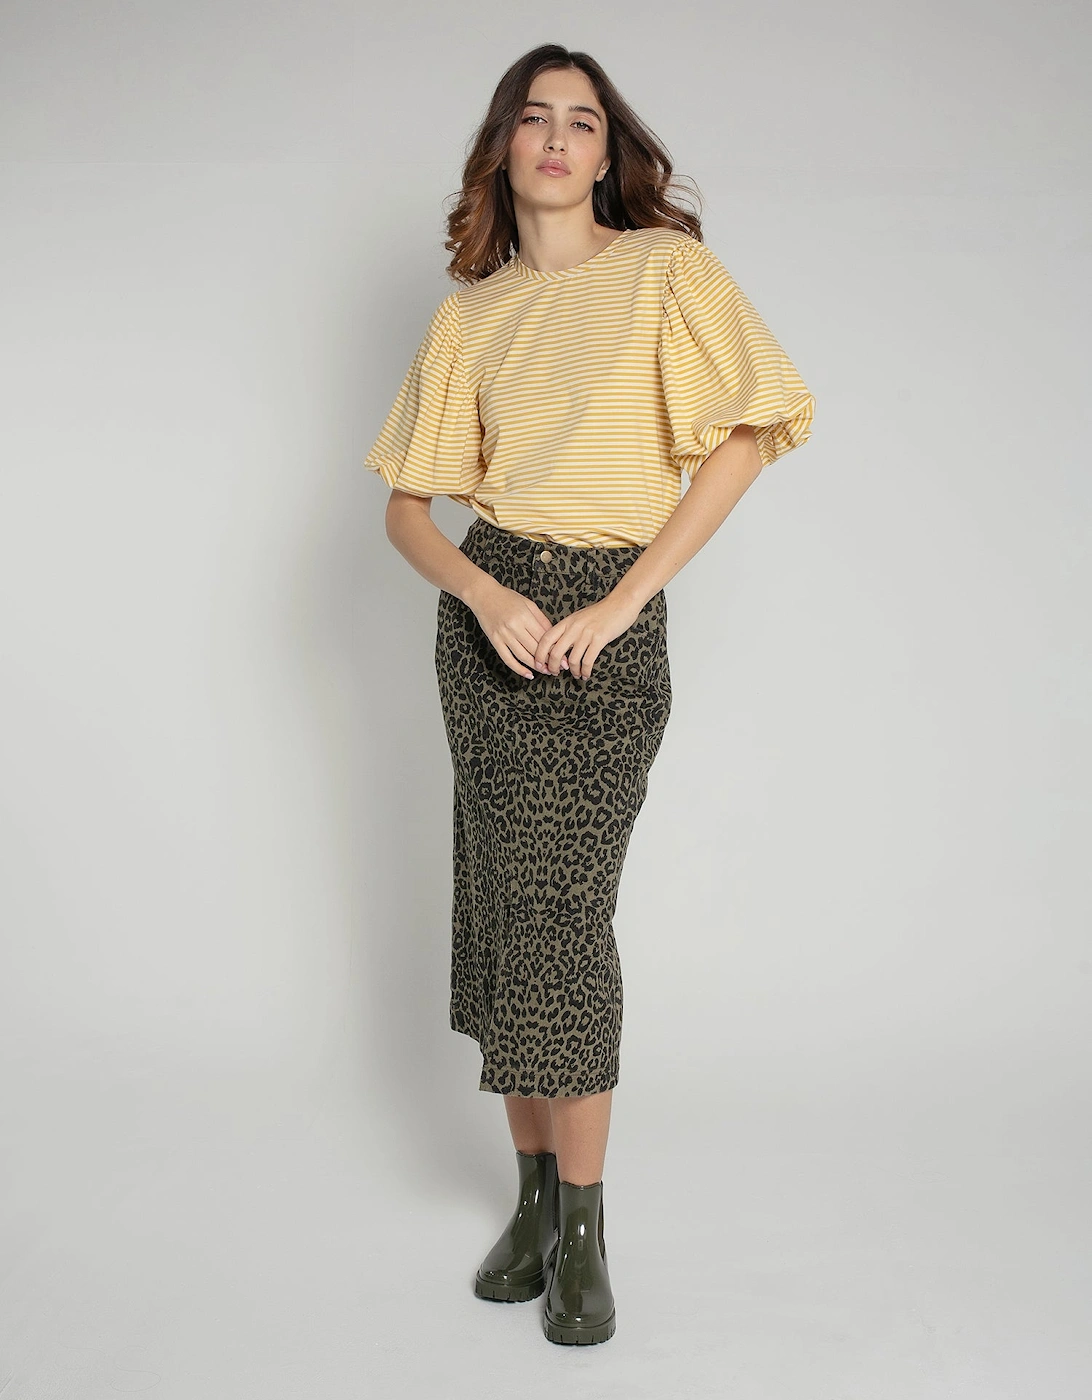 Rhea Top in Yellow and White Stripe, 5 of 4